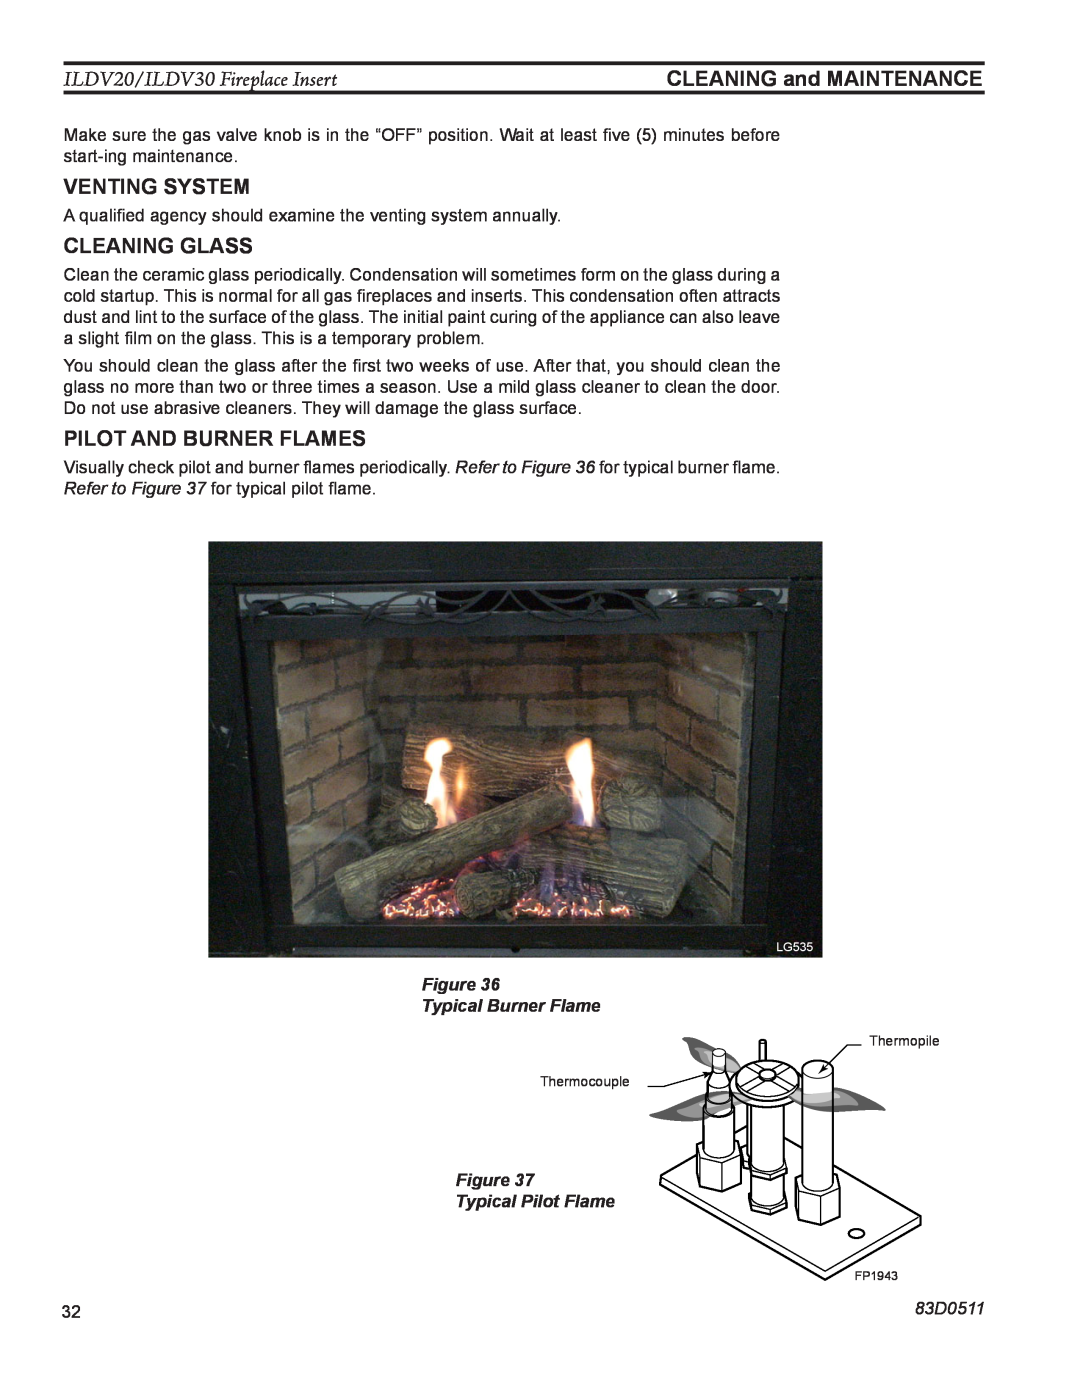 Monessen Hearth ILDV20PV manual CLEANING and MAINTENANCE, Venting system, Cleaning glass, pilot and burner flames, 83D0511 